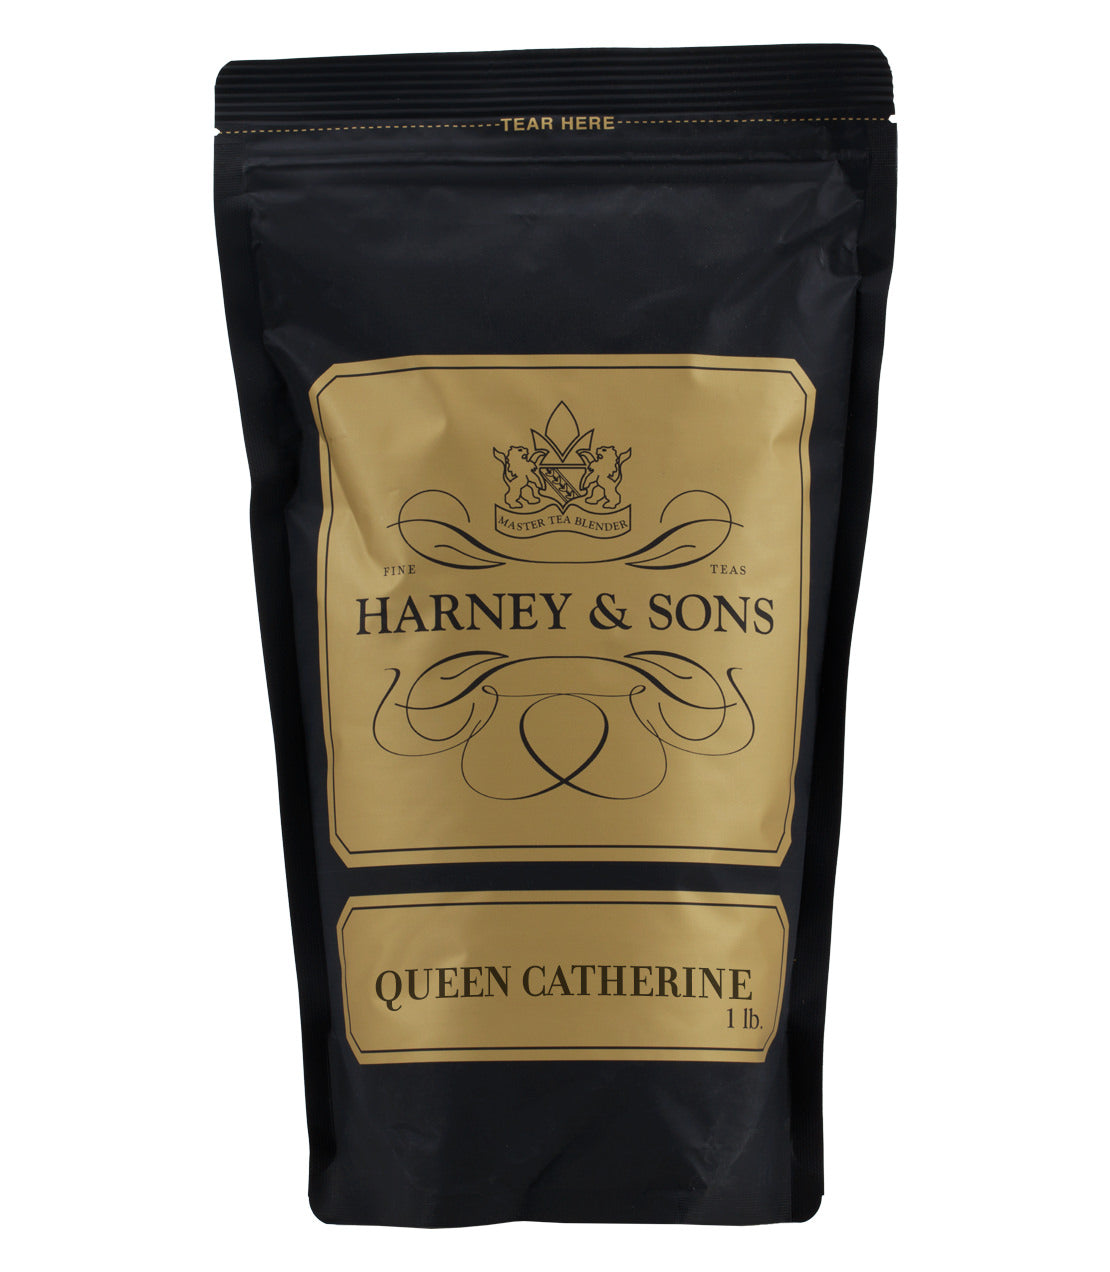 Queen Catherine - Loose 1 lb. Bag - Harney & Sons Fine Teas